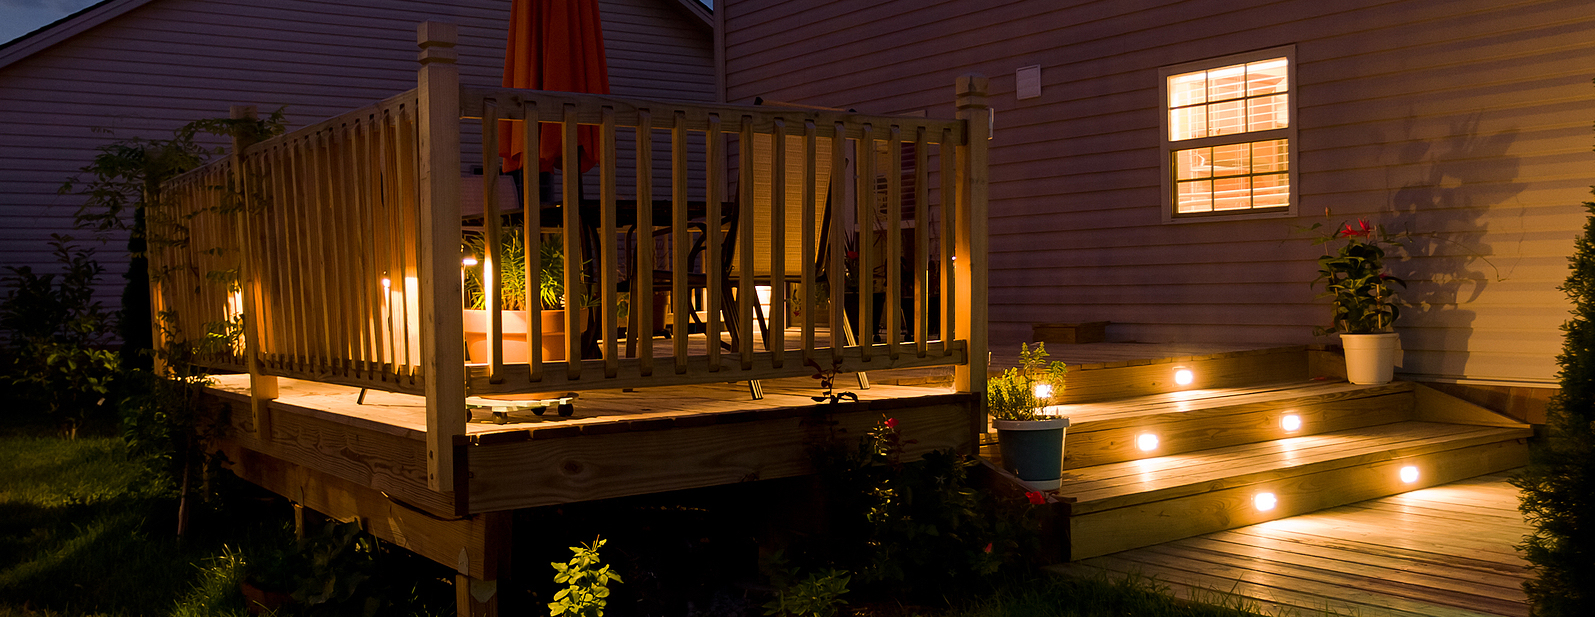 Fortus Electric can help install and maintain outdoor lighting